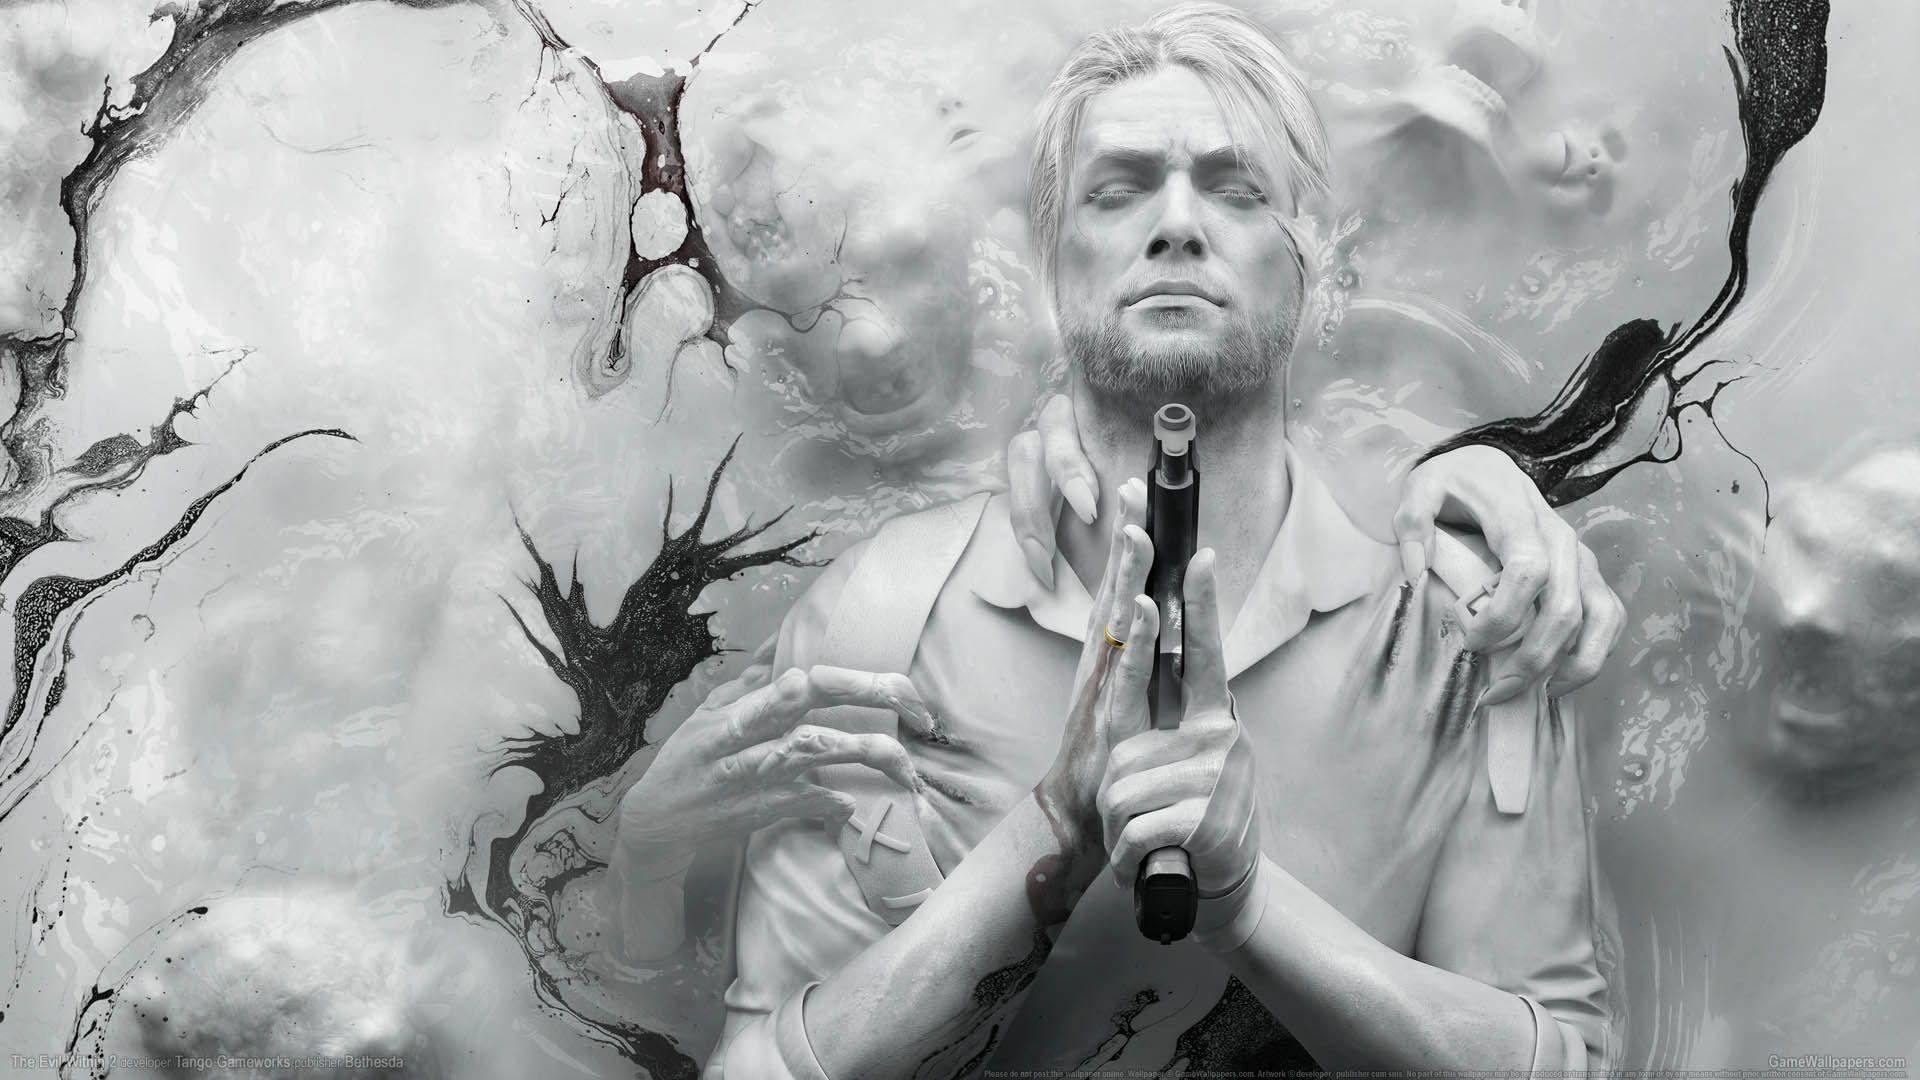 The Evil Within 2 Game Wallpaper 61708 1920x1080 px